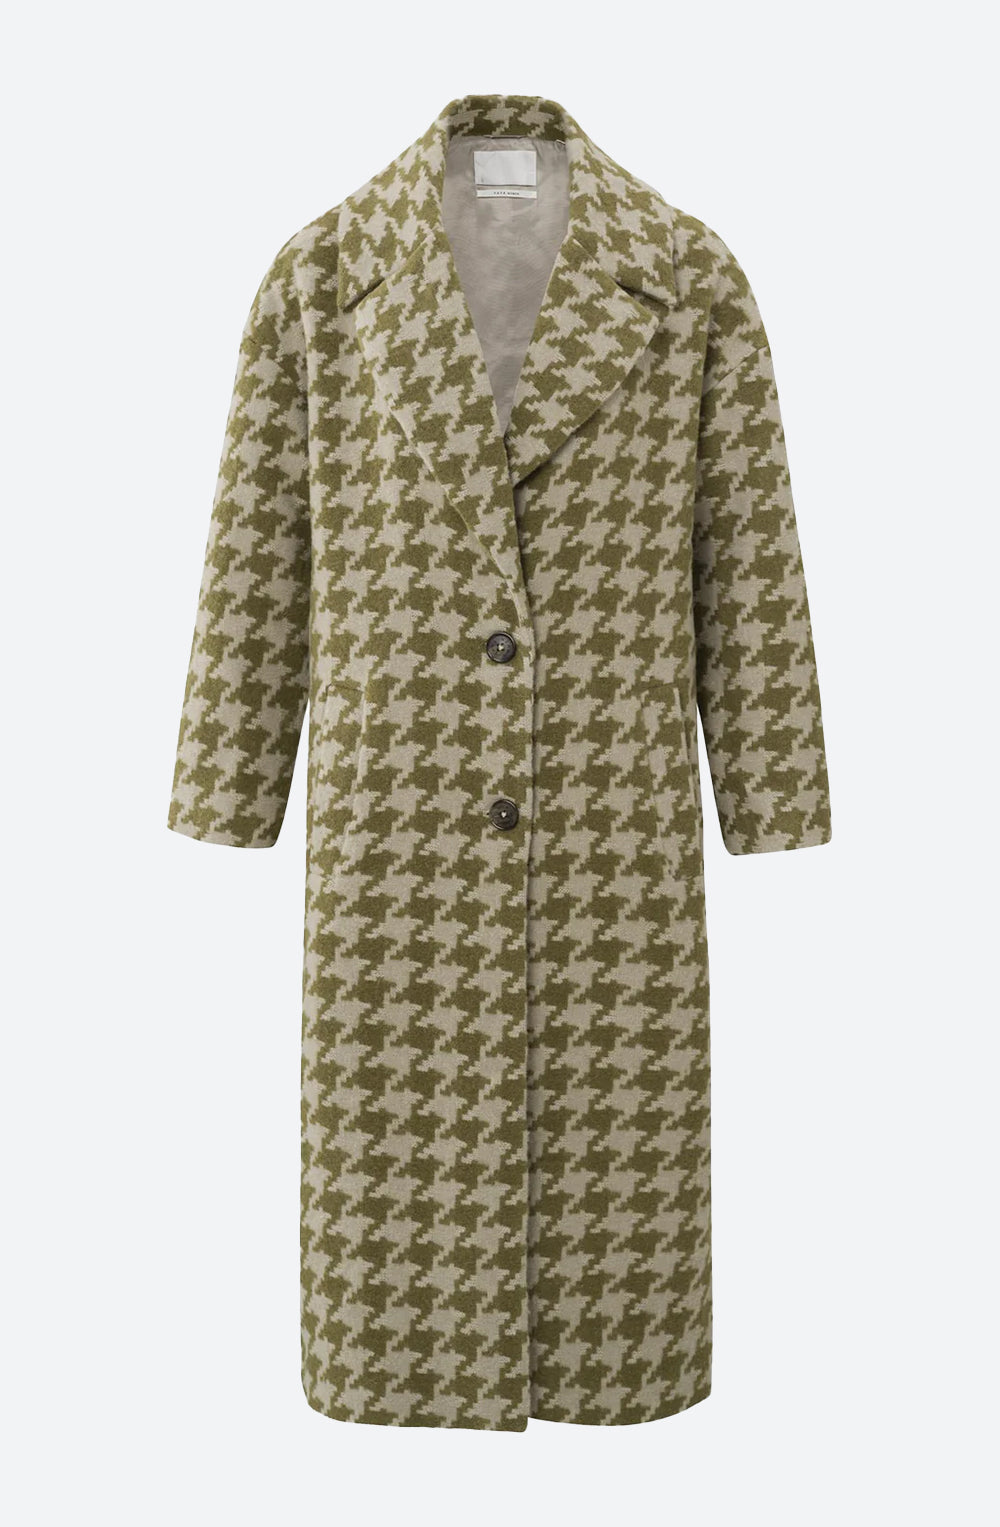 Houndstooth Coat in Gothic Olive Green Dessin